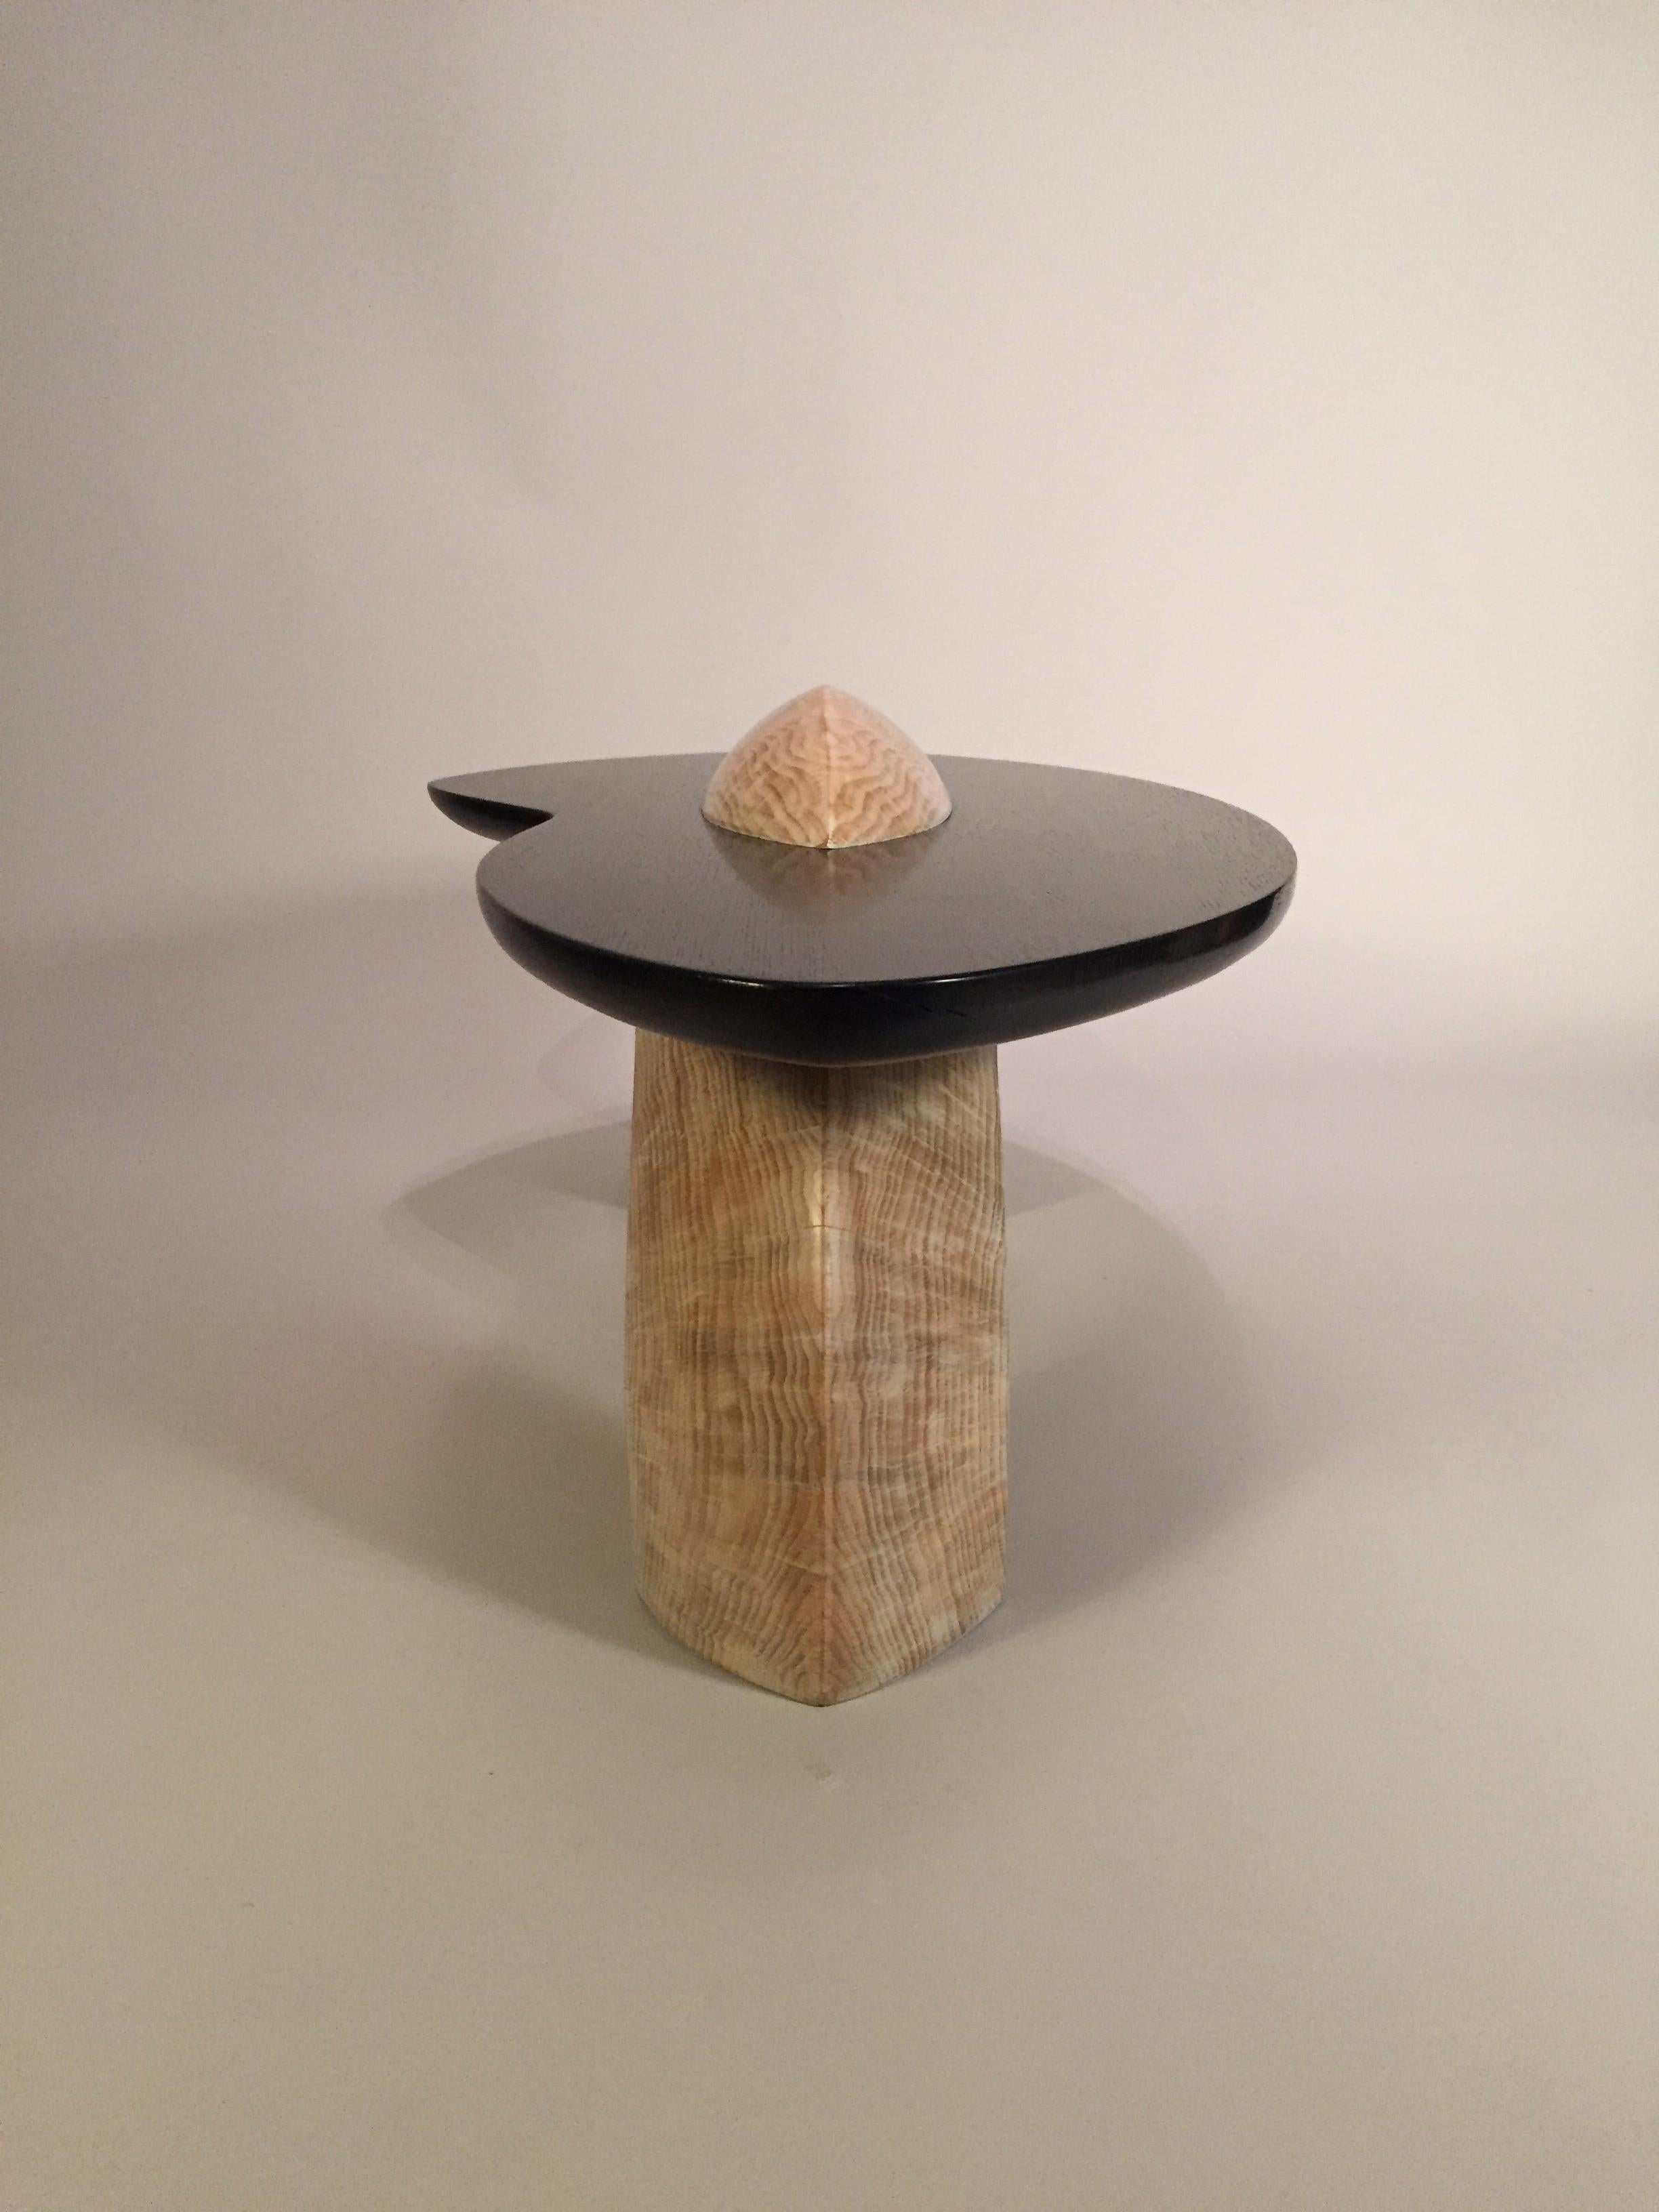 Handcrafted by Gabriel M.

Raw elements of its origin resonate through the aesthetic of this piece. Atop a sculpted 4ft diameter tree trunk of pine wood sits a plain of blackened oak, which celebrates the harmony between the human touch and the